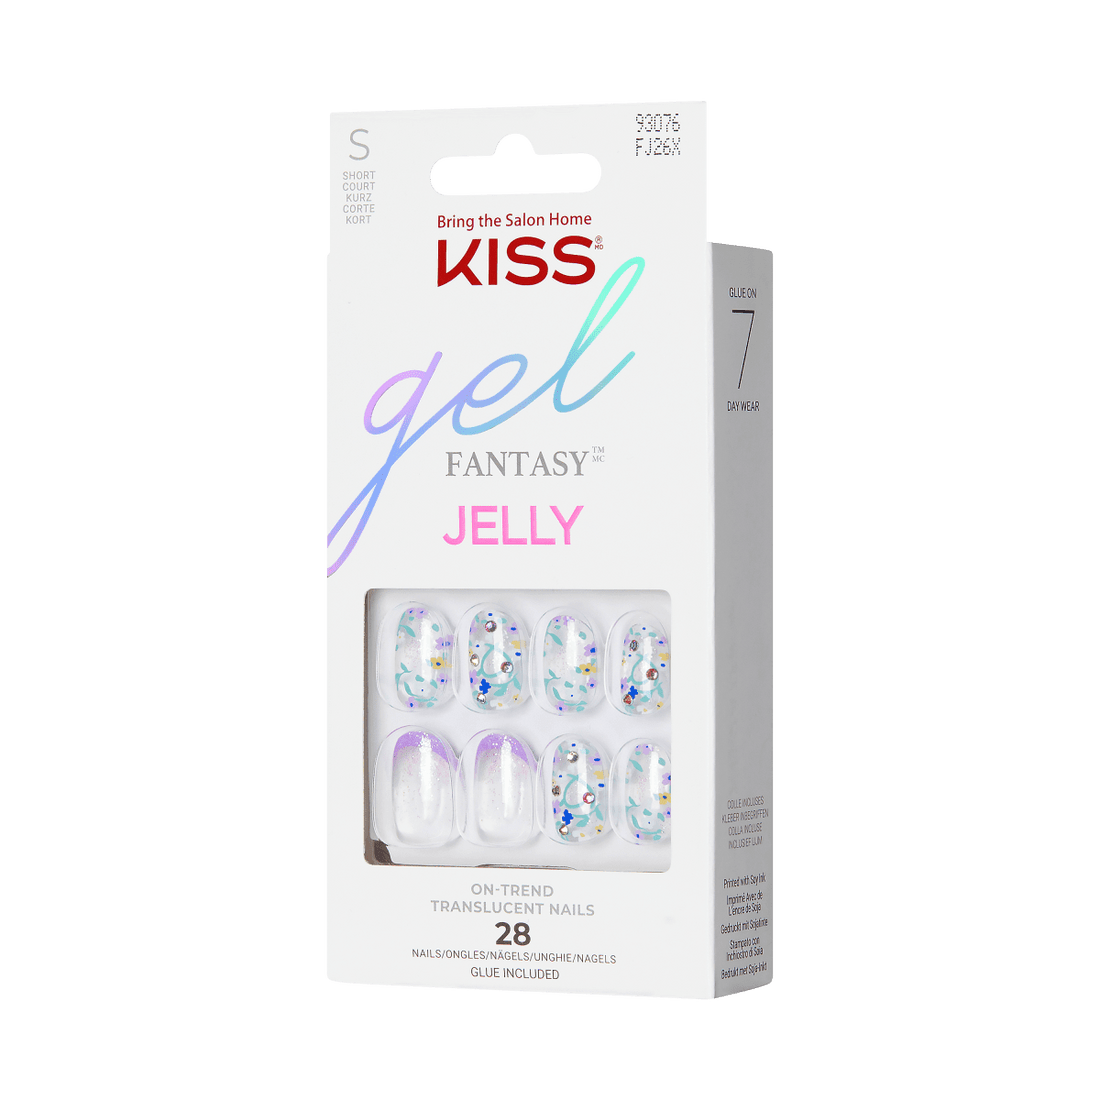 KISS Gel Fantasy Summer Jelly Press-On Nails - Jelly Rose